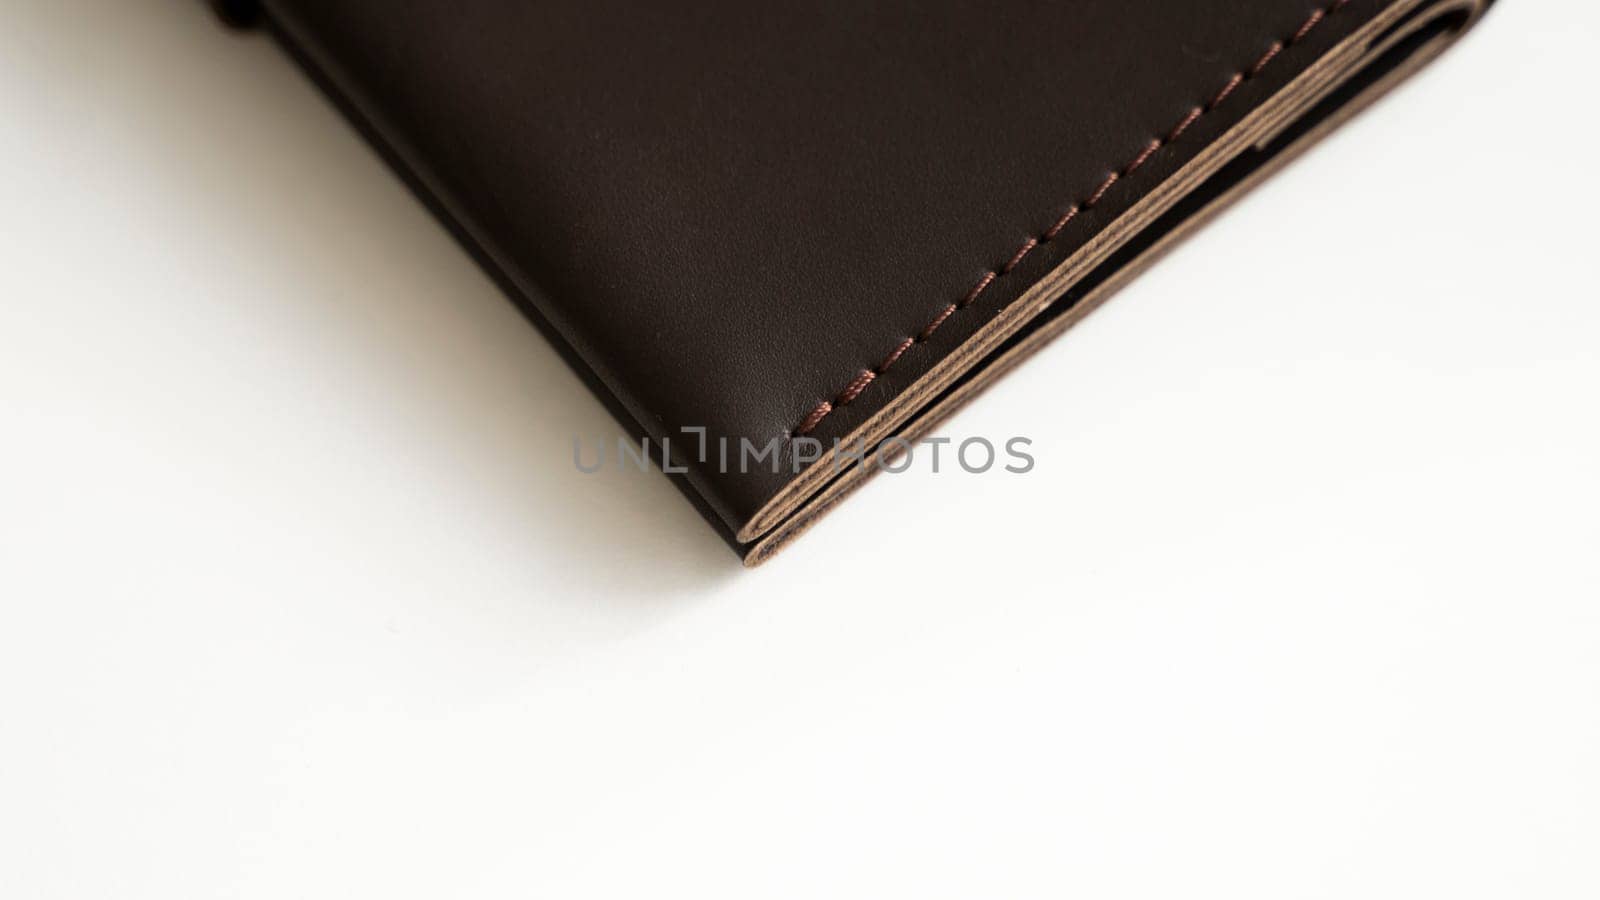 Details of brown elegance men's leather wallet on a white background. Mens leather accessories. Natural leather